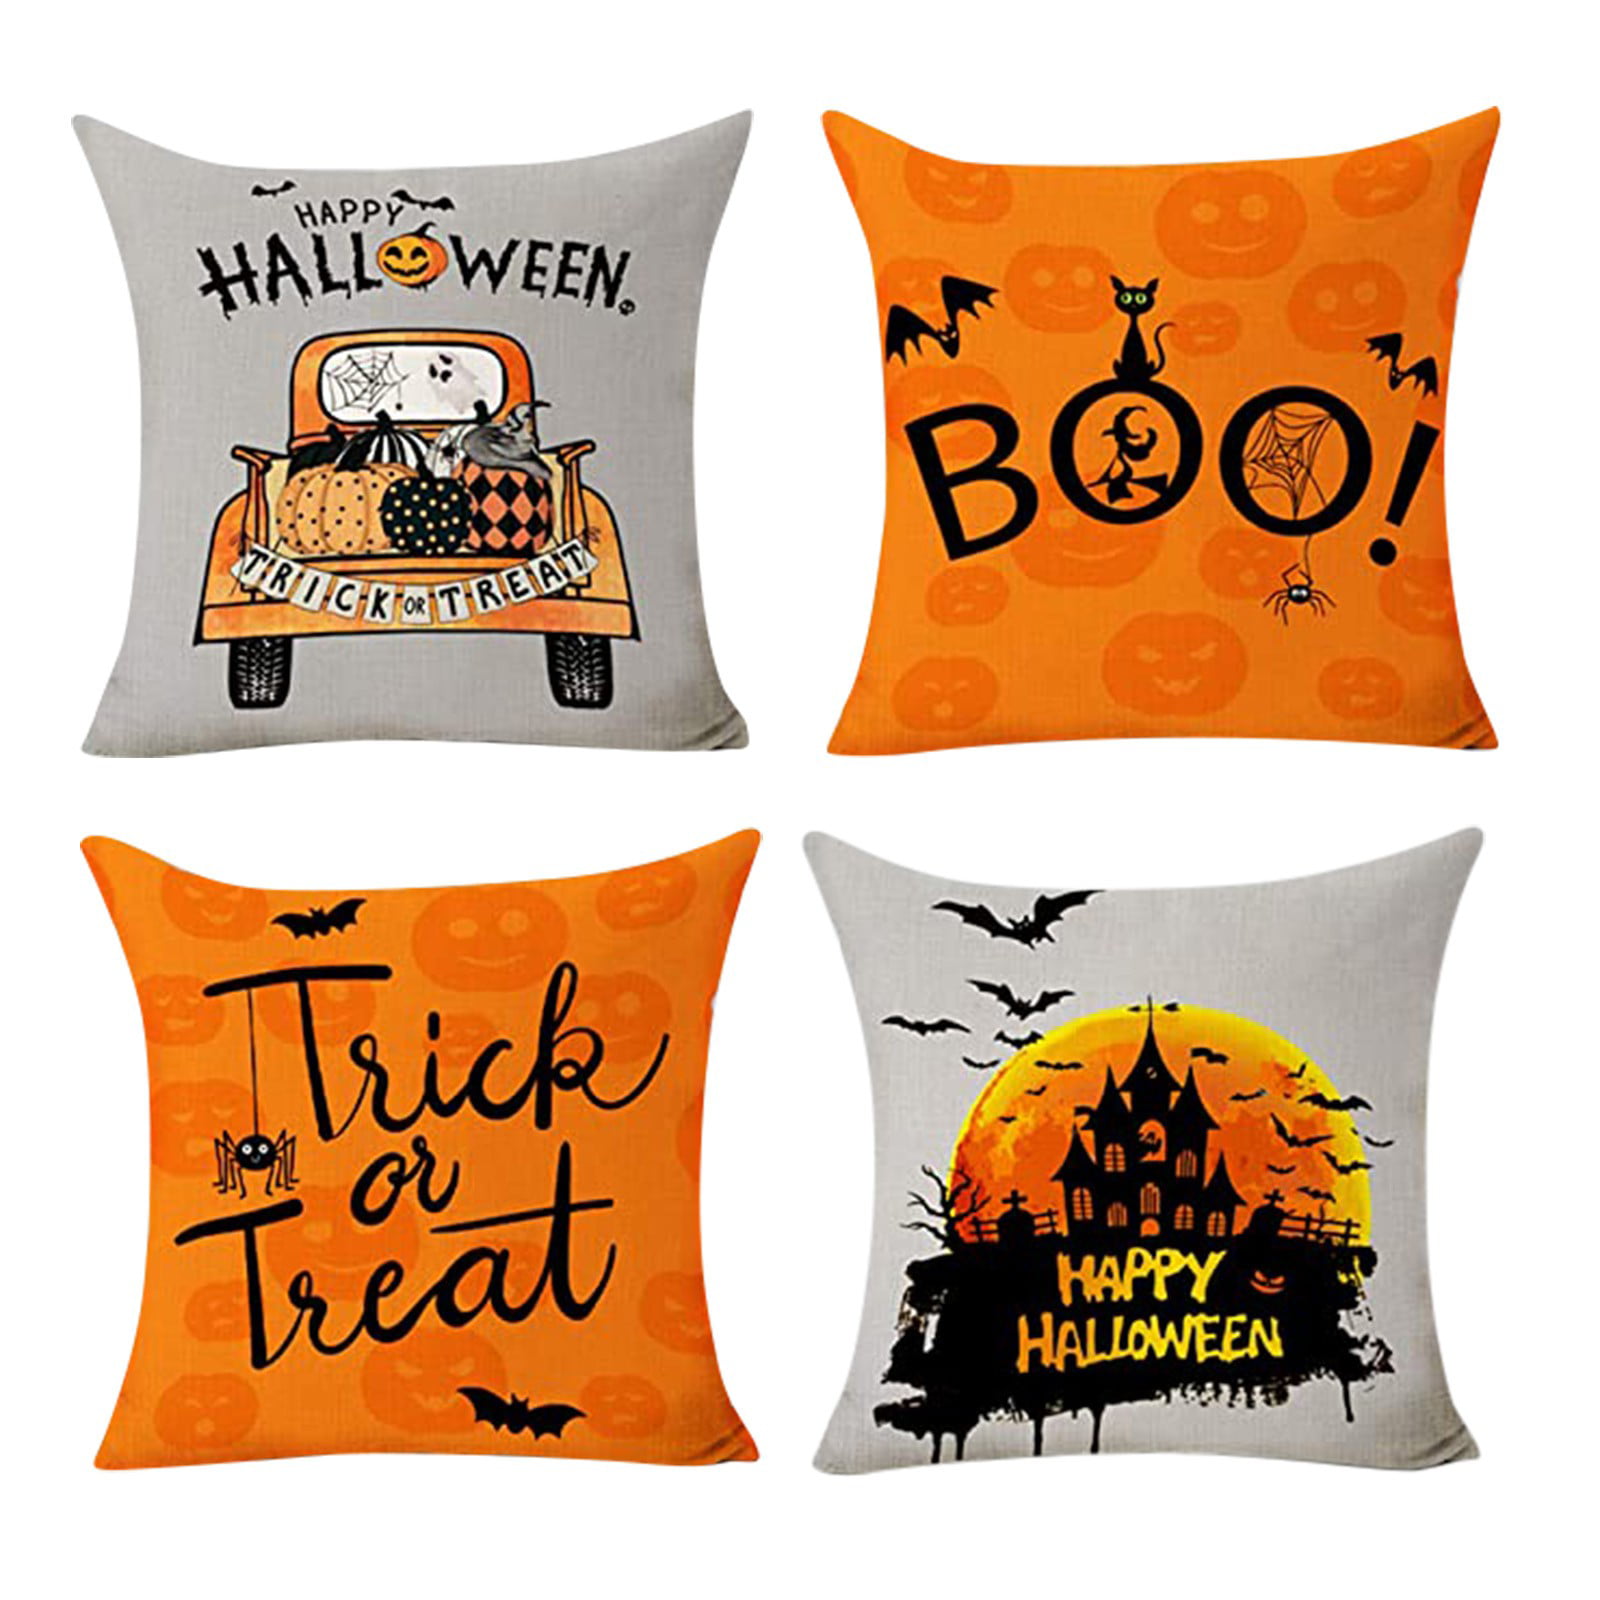 4pcs cushion covers black fairy flower girl decorative pillows for couch on sale